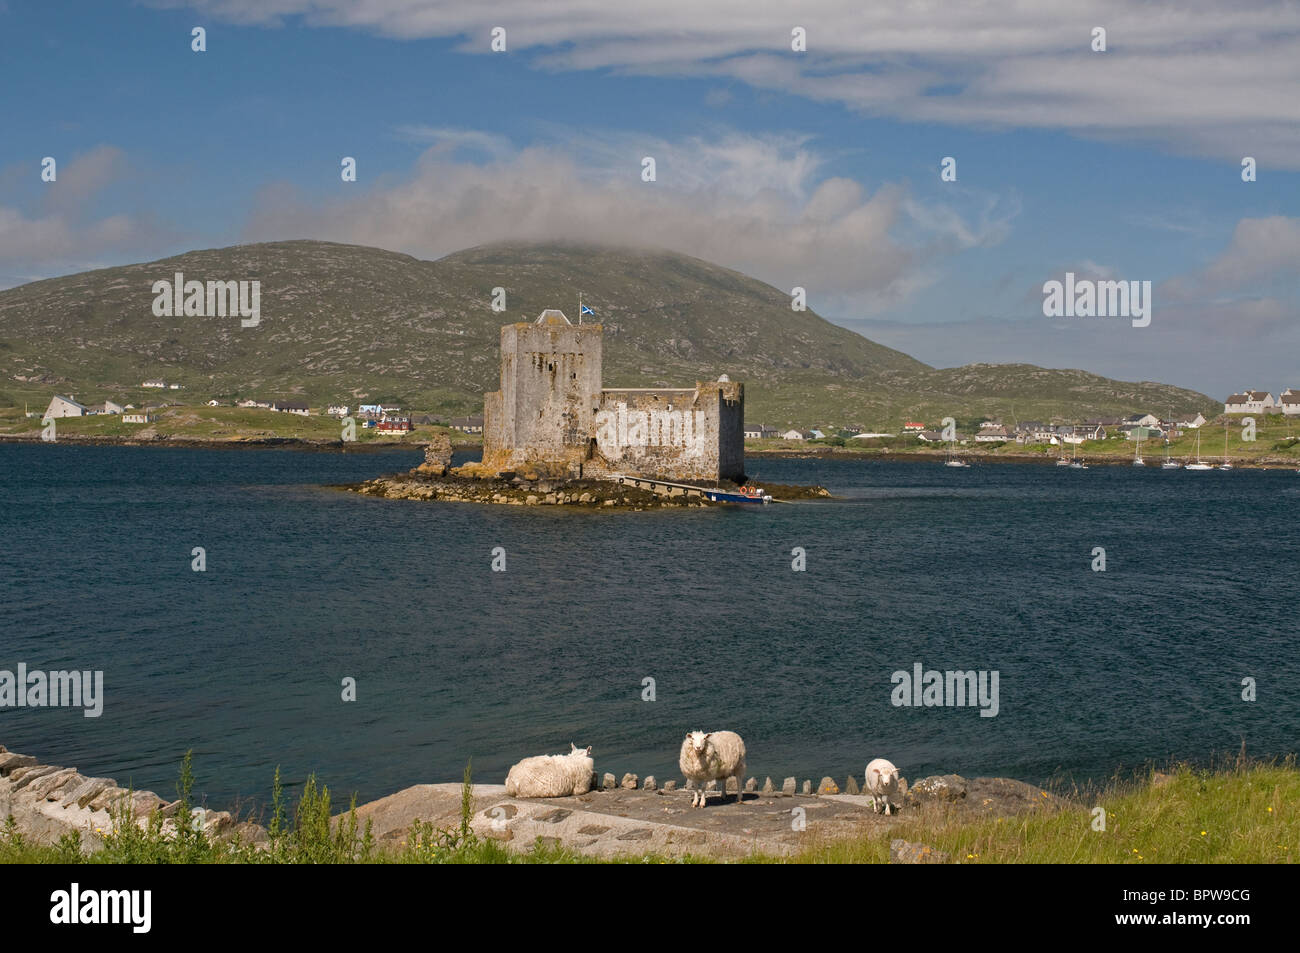 Kisimul Castle sits in Castlebay on the Island of Barra, Outer Hebrides Western Isles. Scotland   SCO 6535 Stock Photo